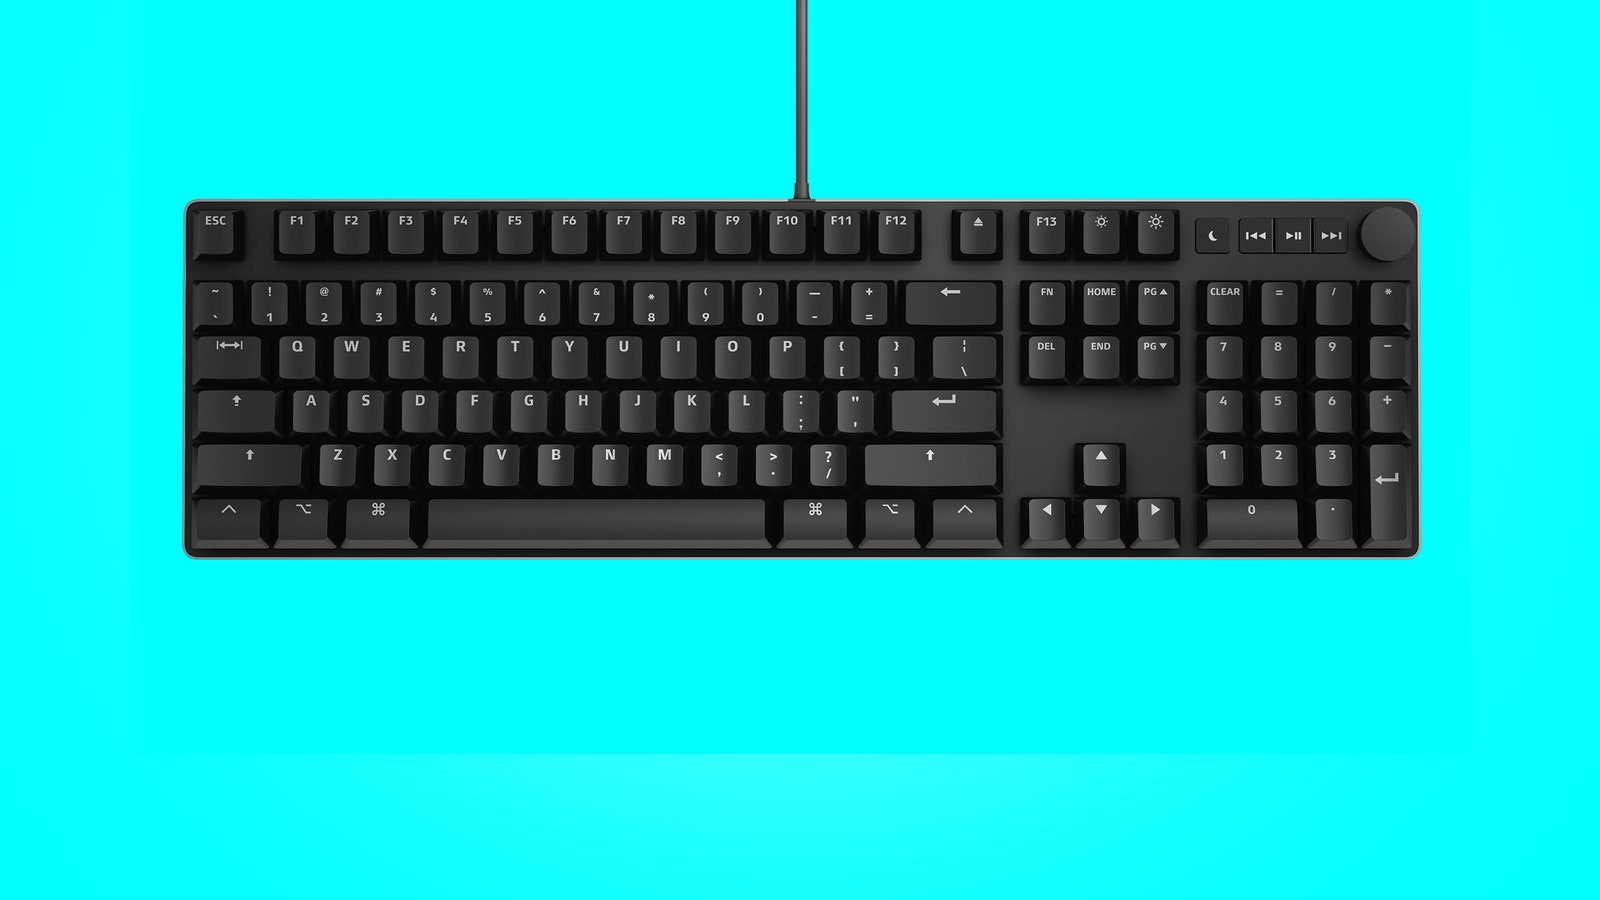 Das Keyboard MacTigr photographed from above against a turquoise background